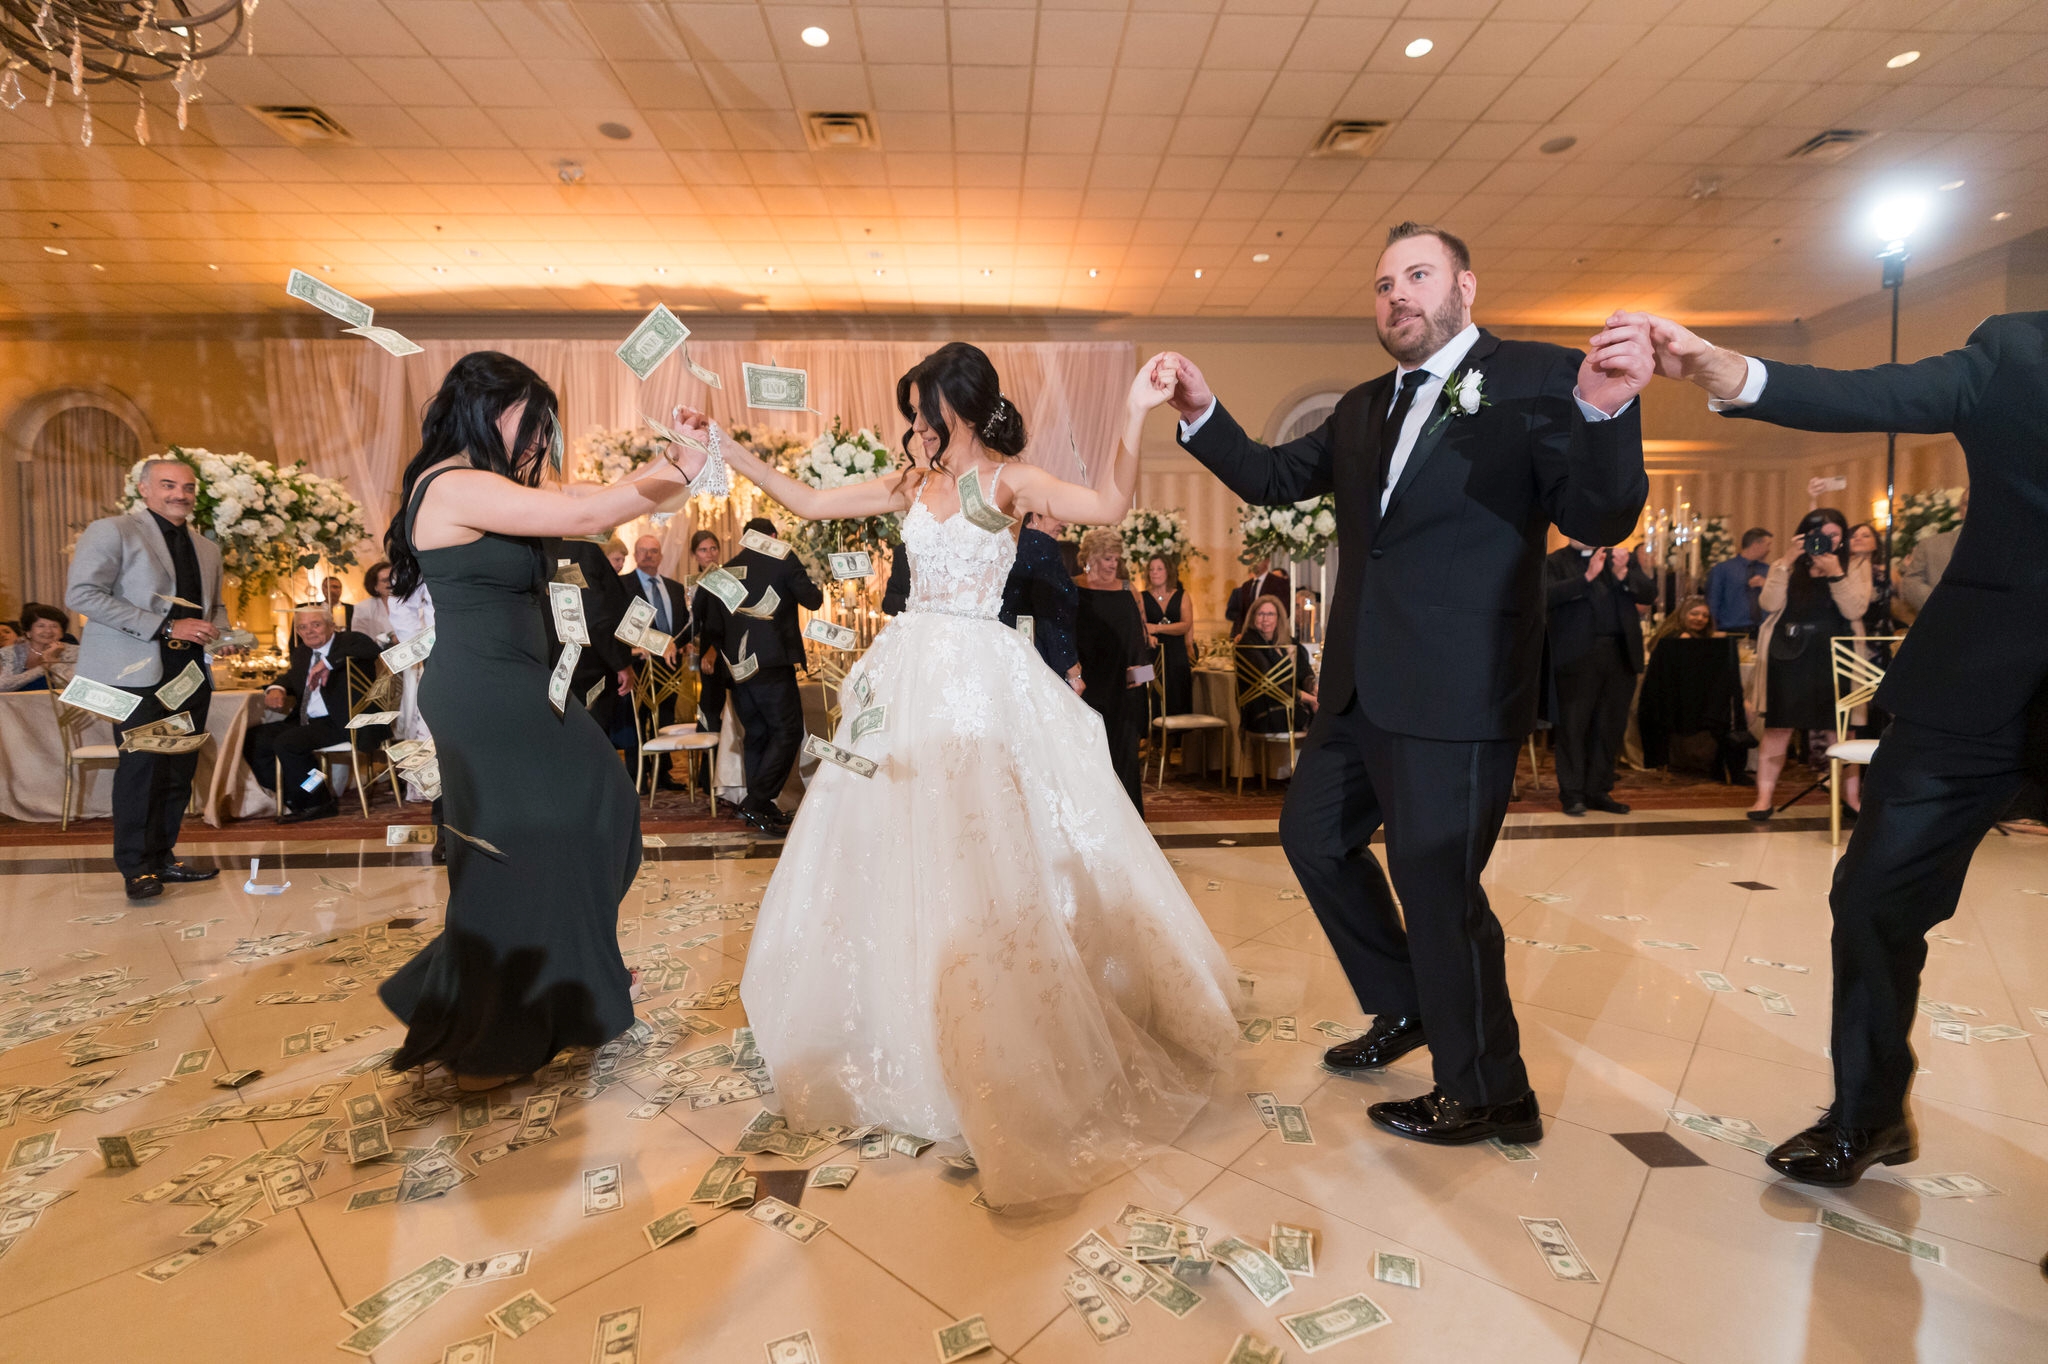 A Greek wedding dance takes place at Palazzo Grande wedding reception in Shelby Township, MI.  